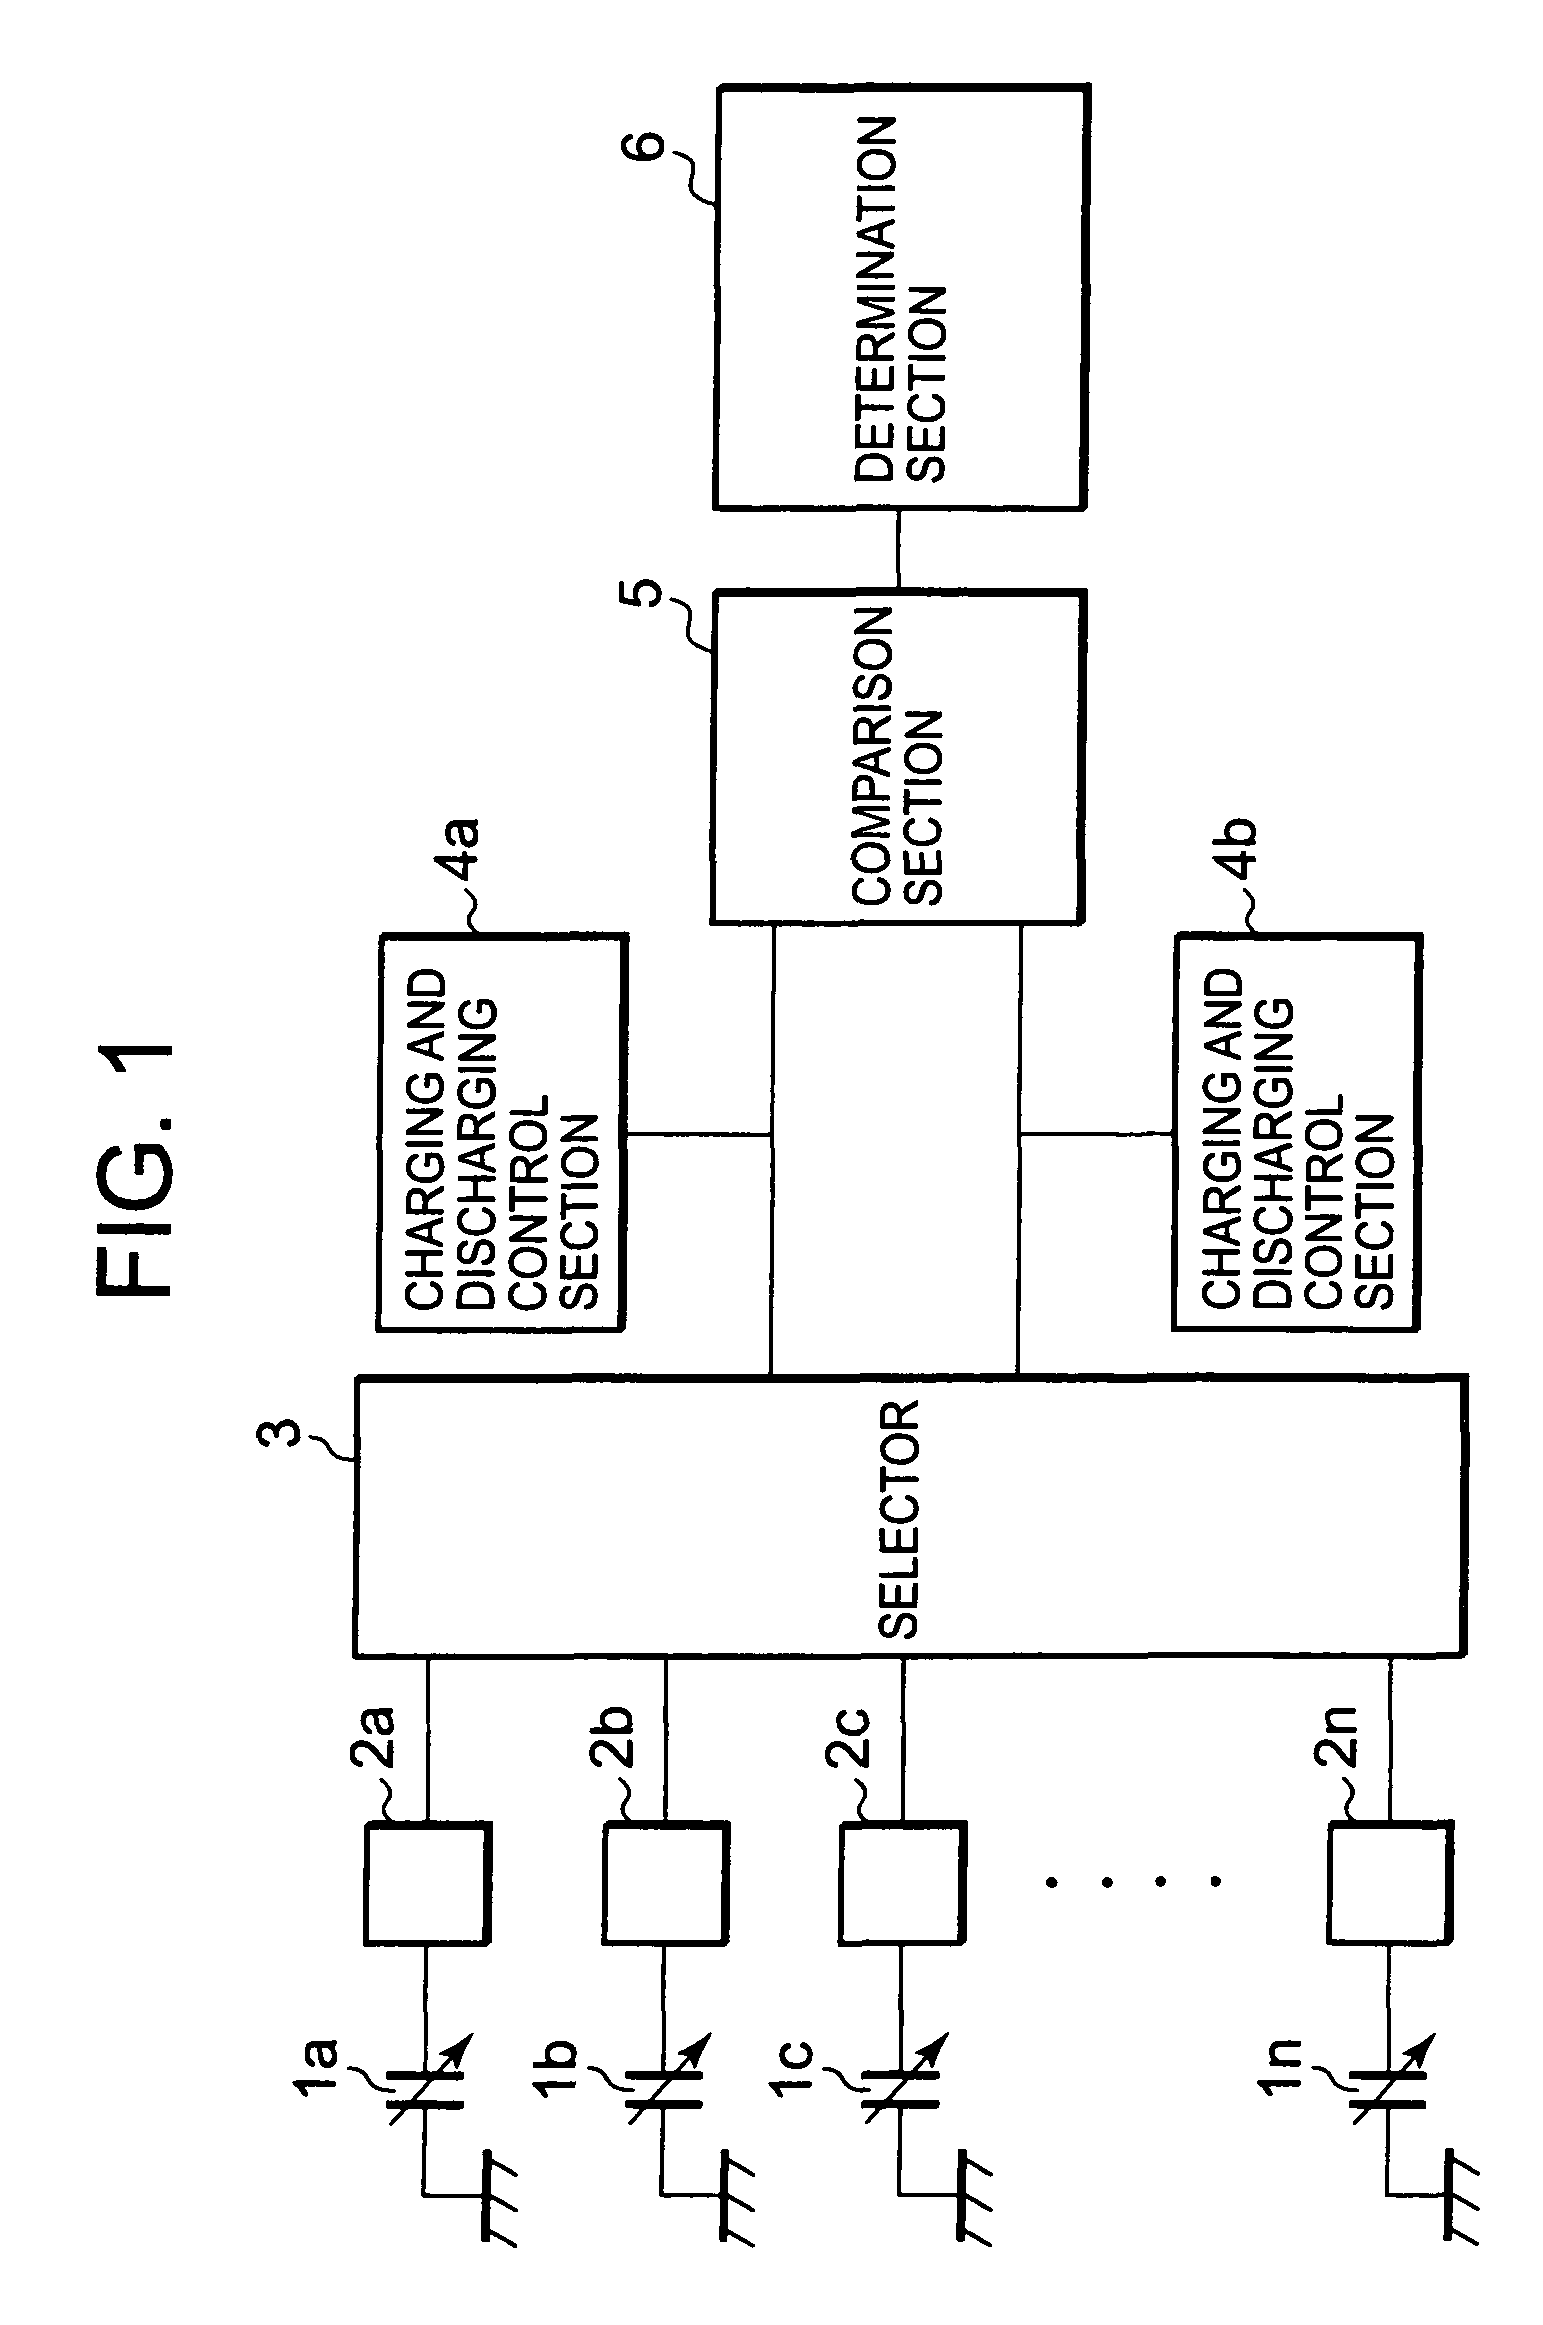 Capacitive sensing device and method